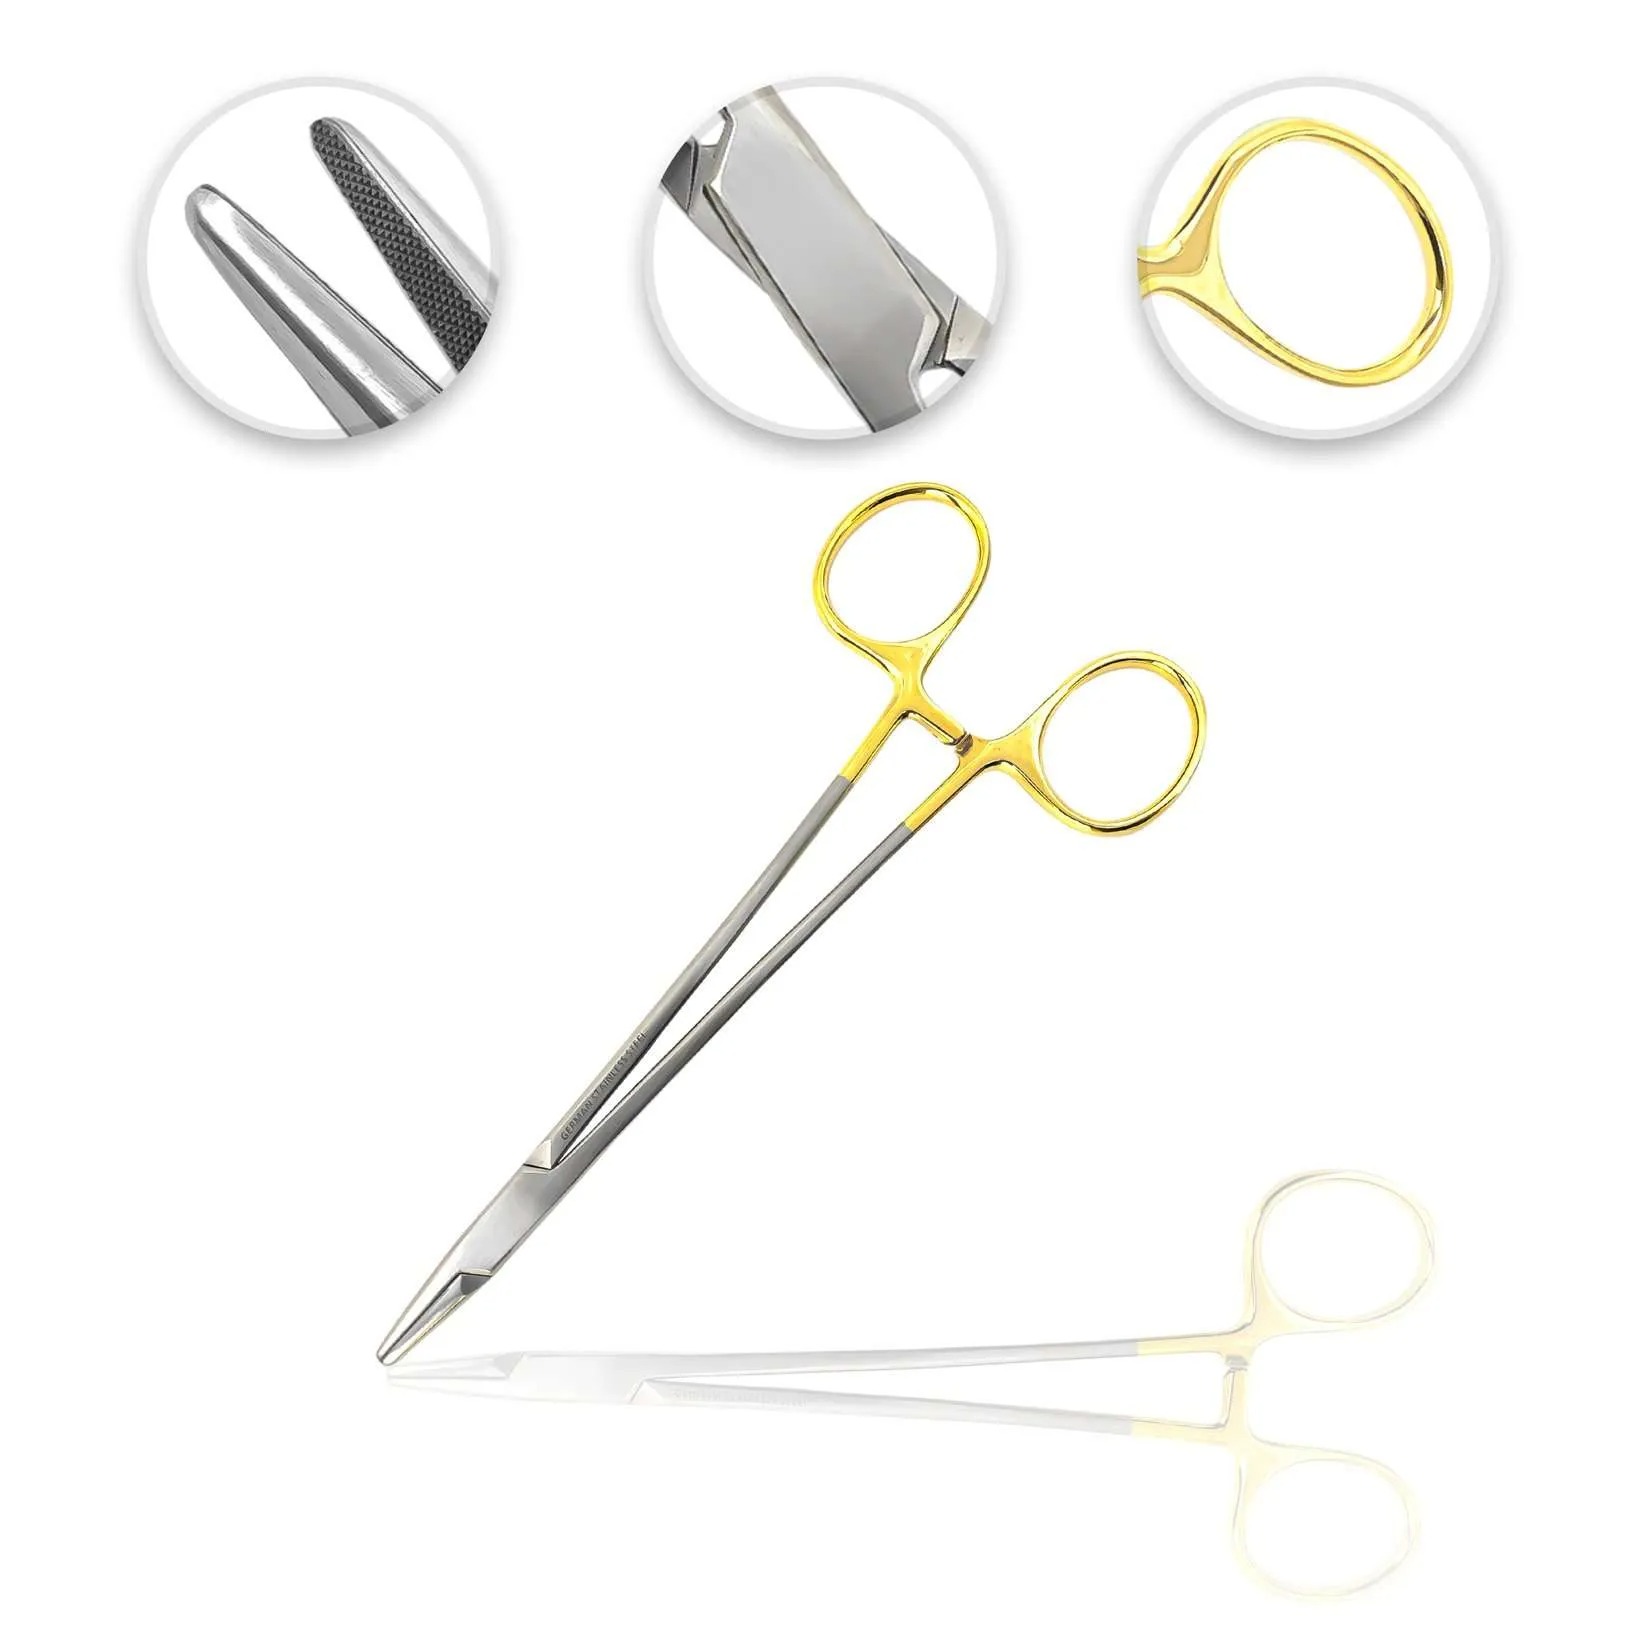 Significance of Using Needle Holder